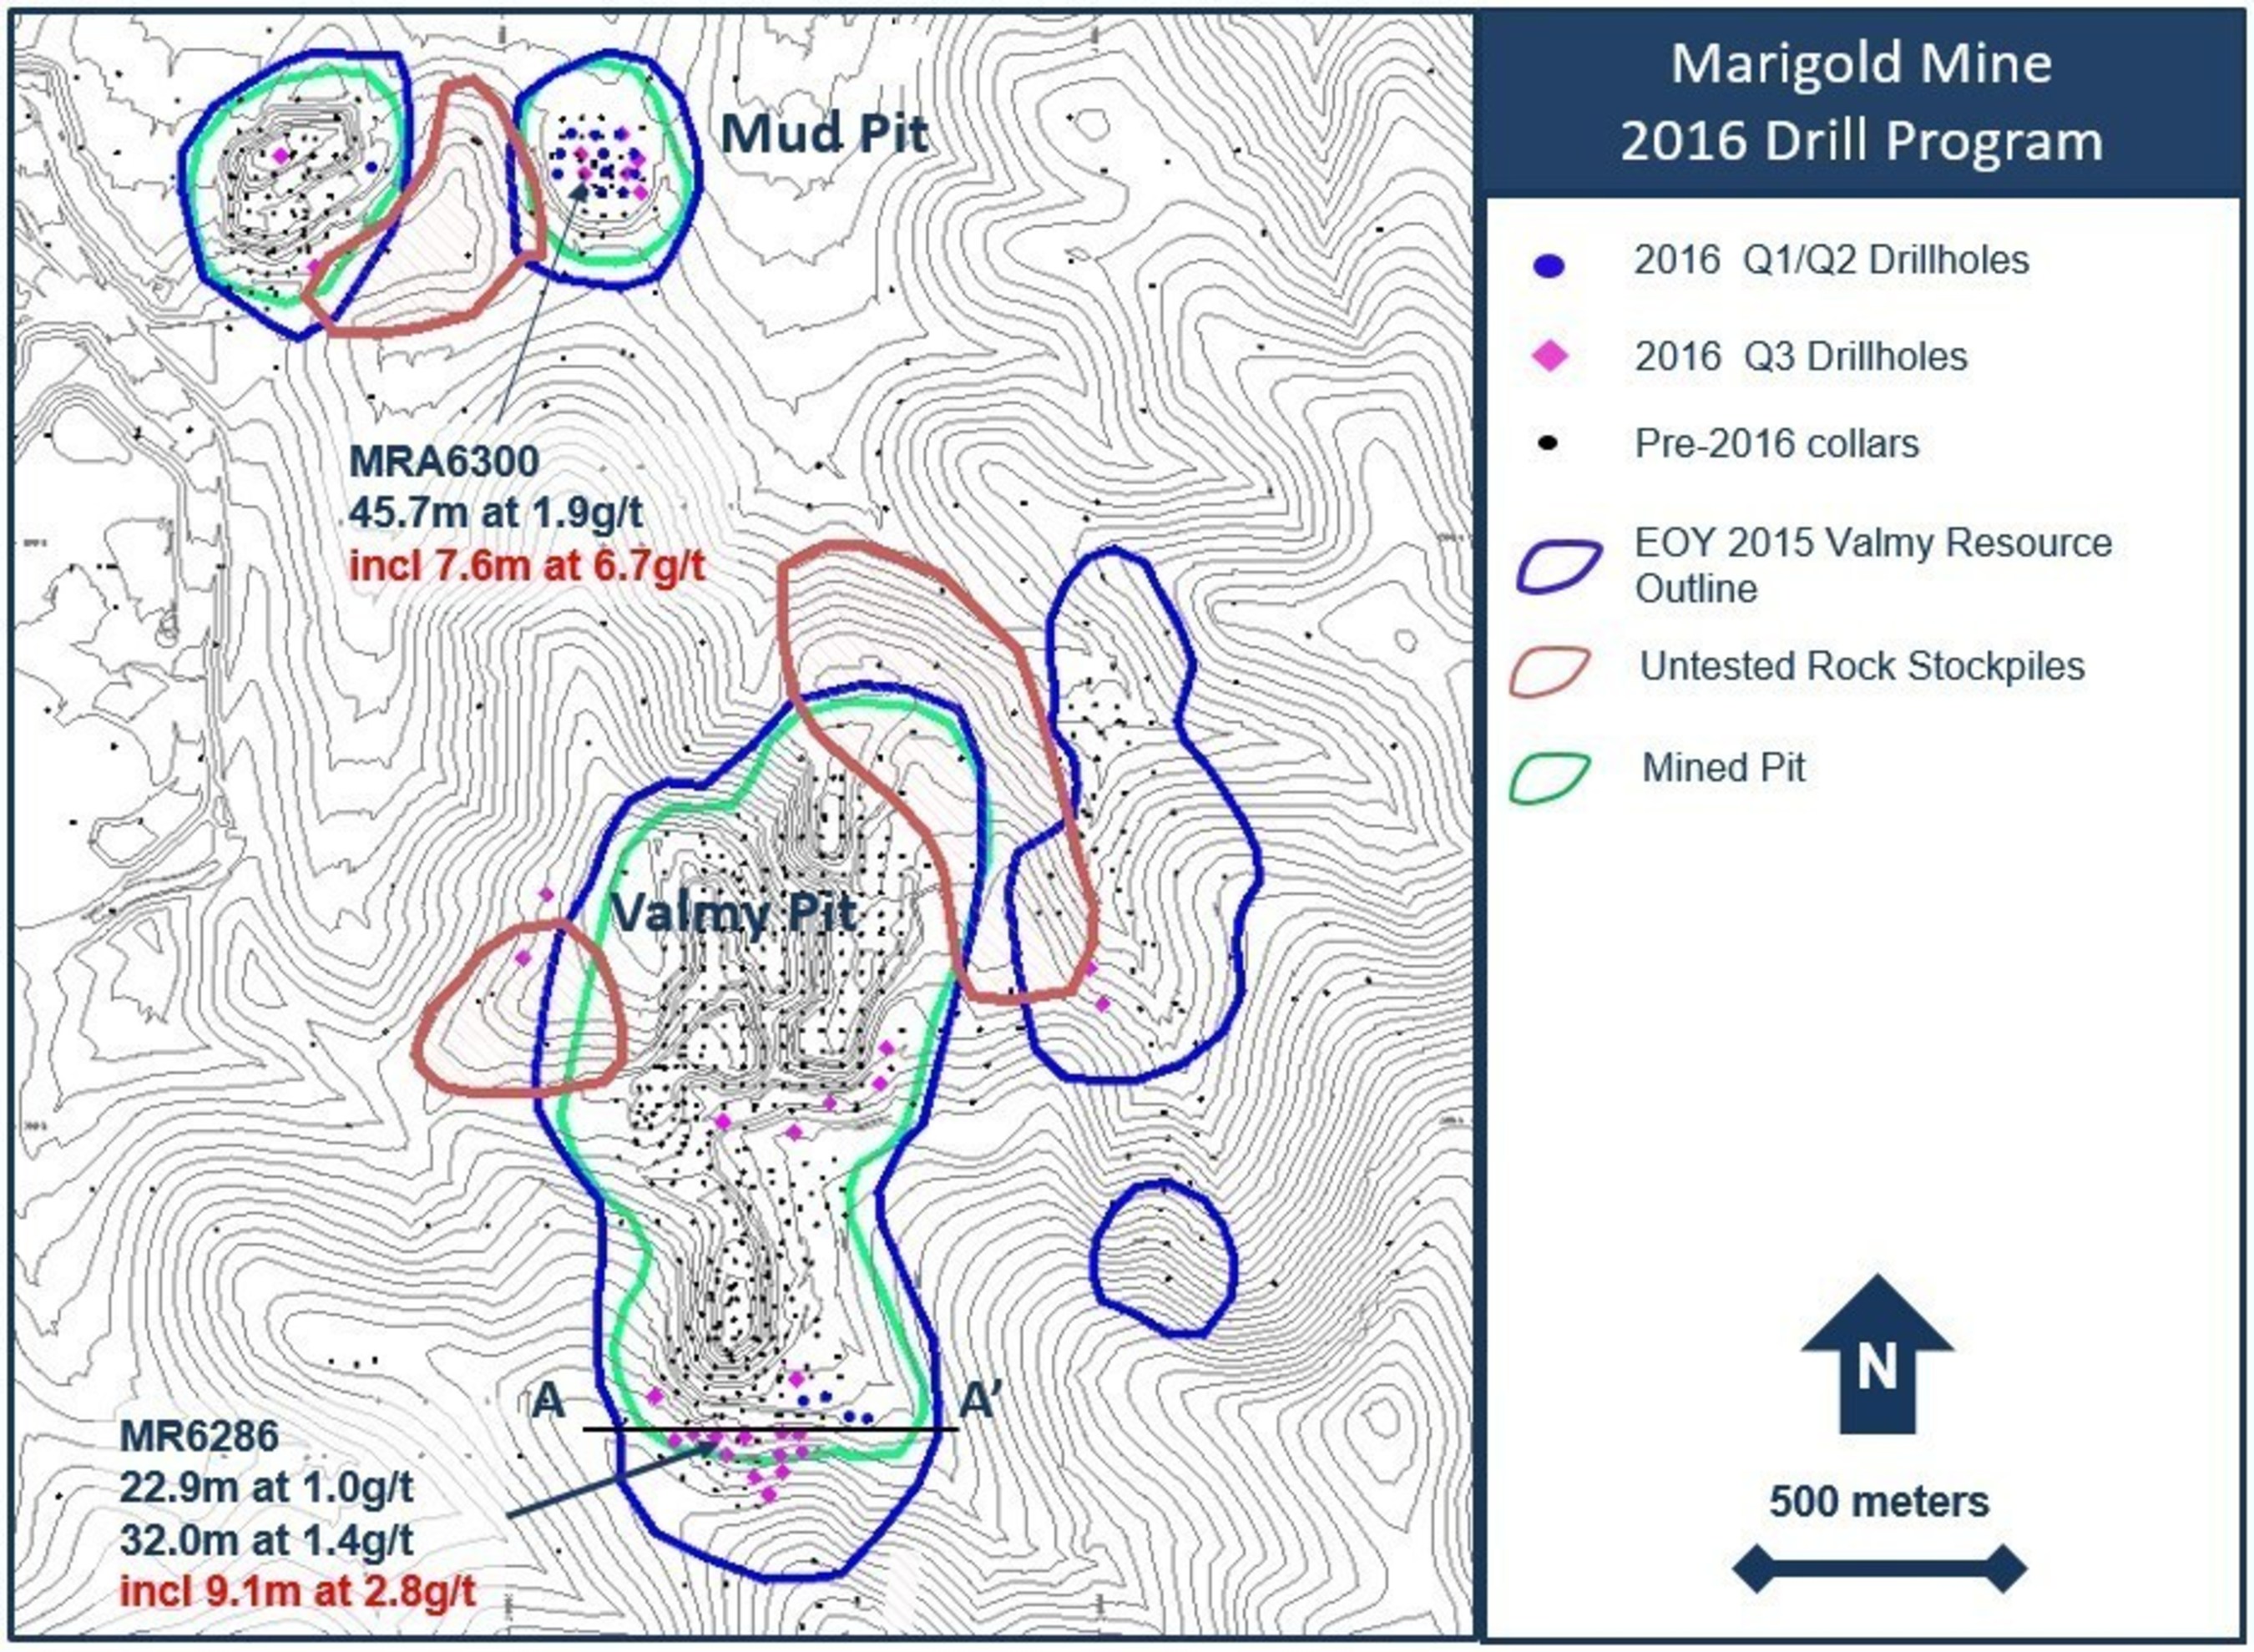 Figure 2. Drillhole location plan map for the 2016 exploration drill program at the Valmy property, Marigold mine, Nevada, U.S.